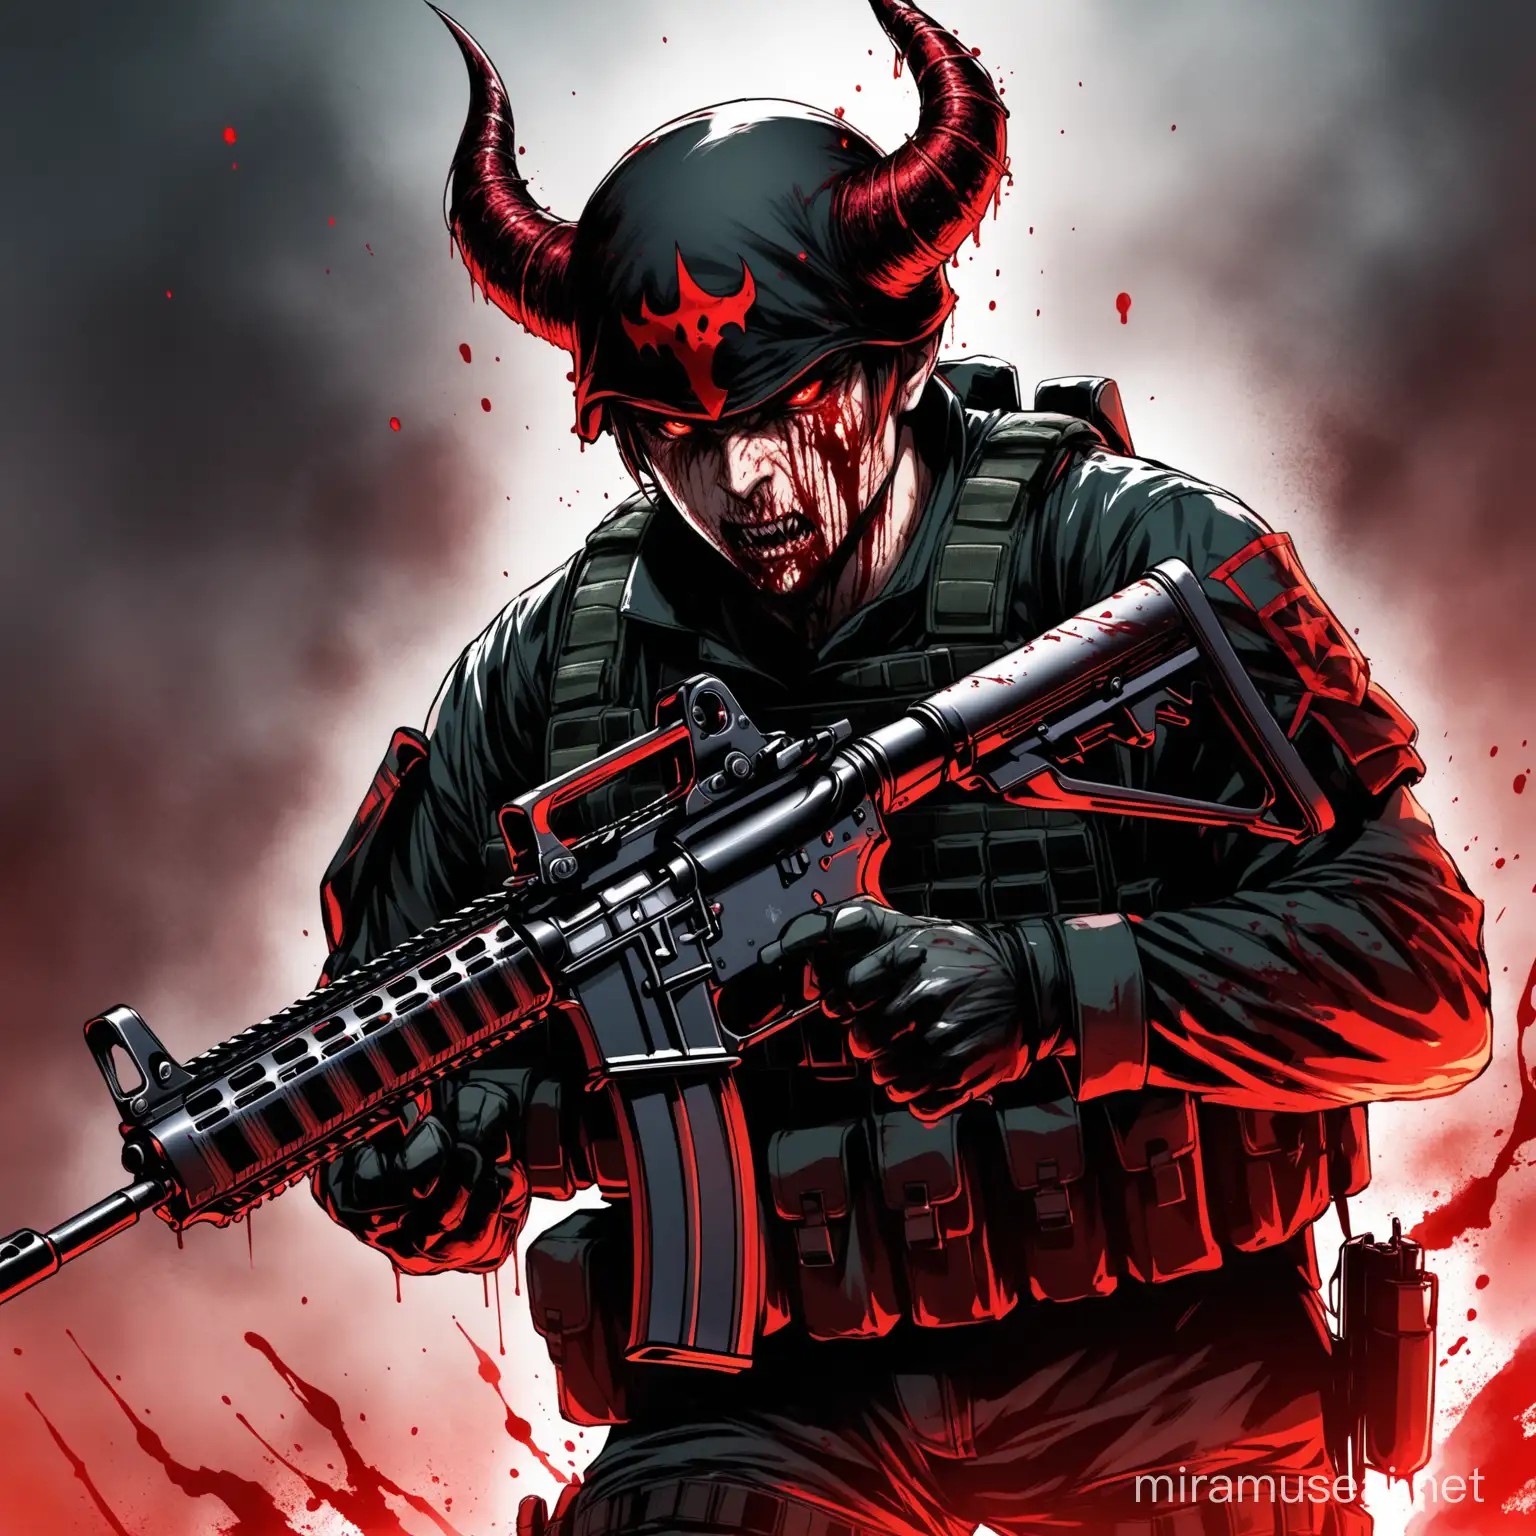 Demon Soldier with Assault Rifle in Bloody Confrontation